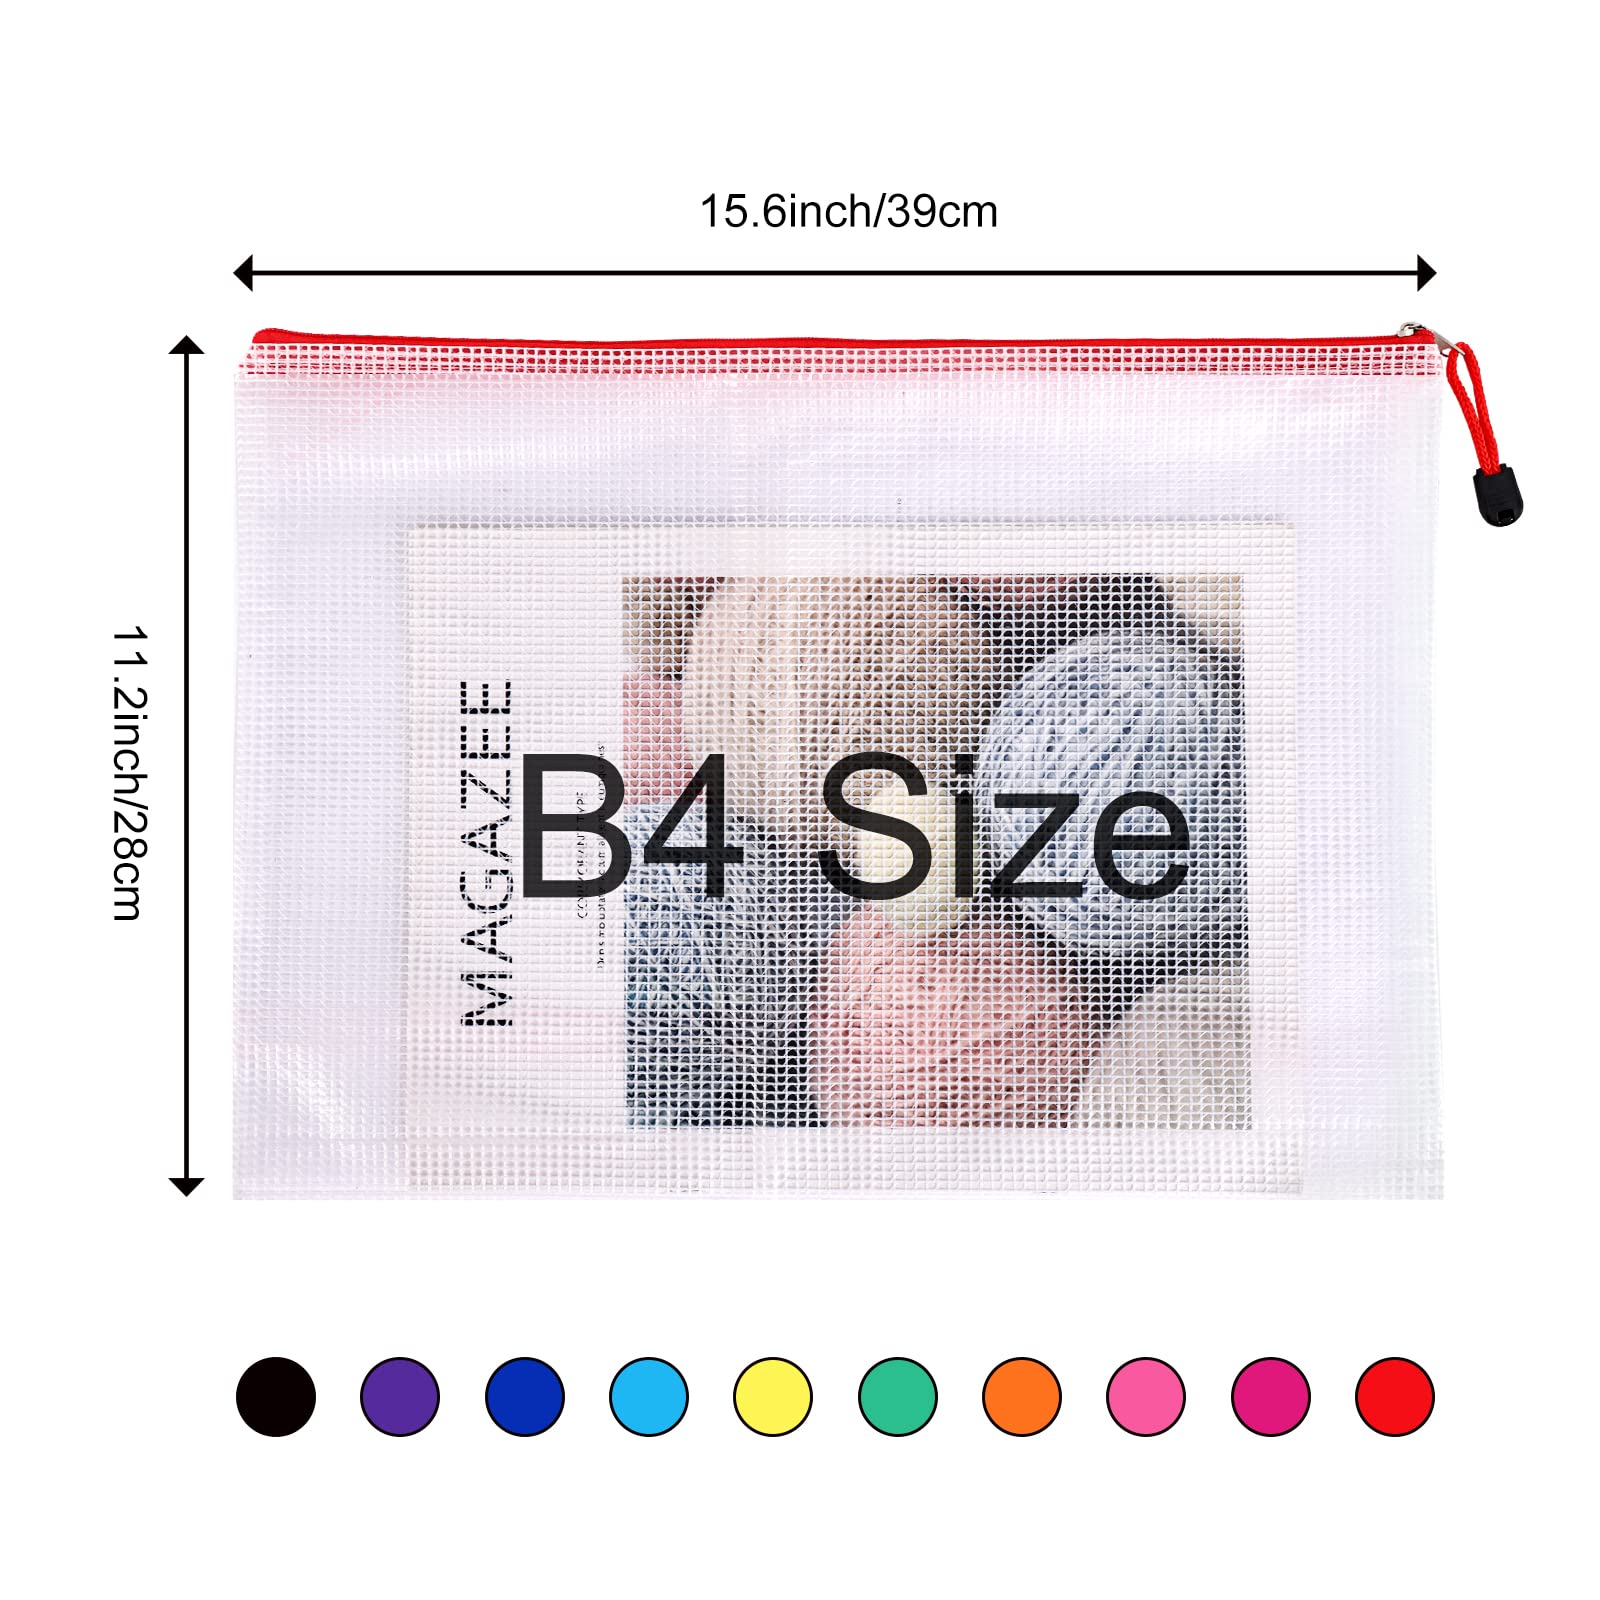 EOOUT 20pcs Large Mesh Zipper Pouch Bags Board Games Storage 11.2x15.6, 10 Colors Puzzle Bag for Organizing Storage, B4 Size, for School Travel Office Supplies